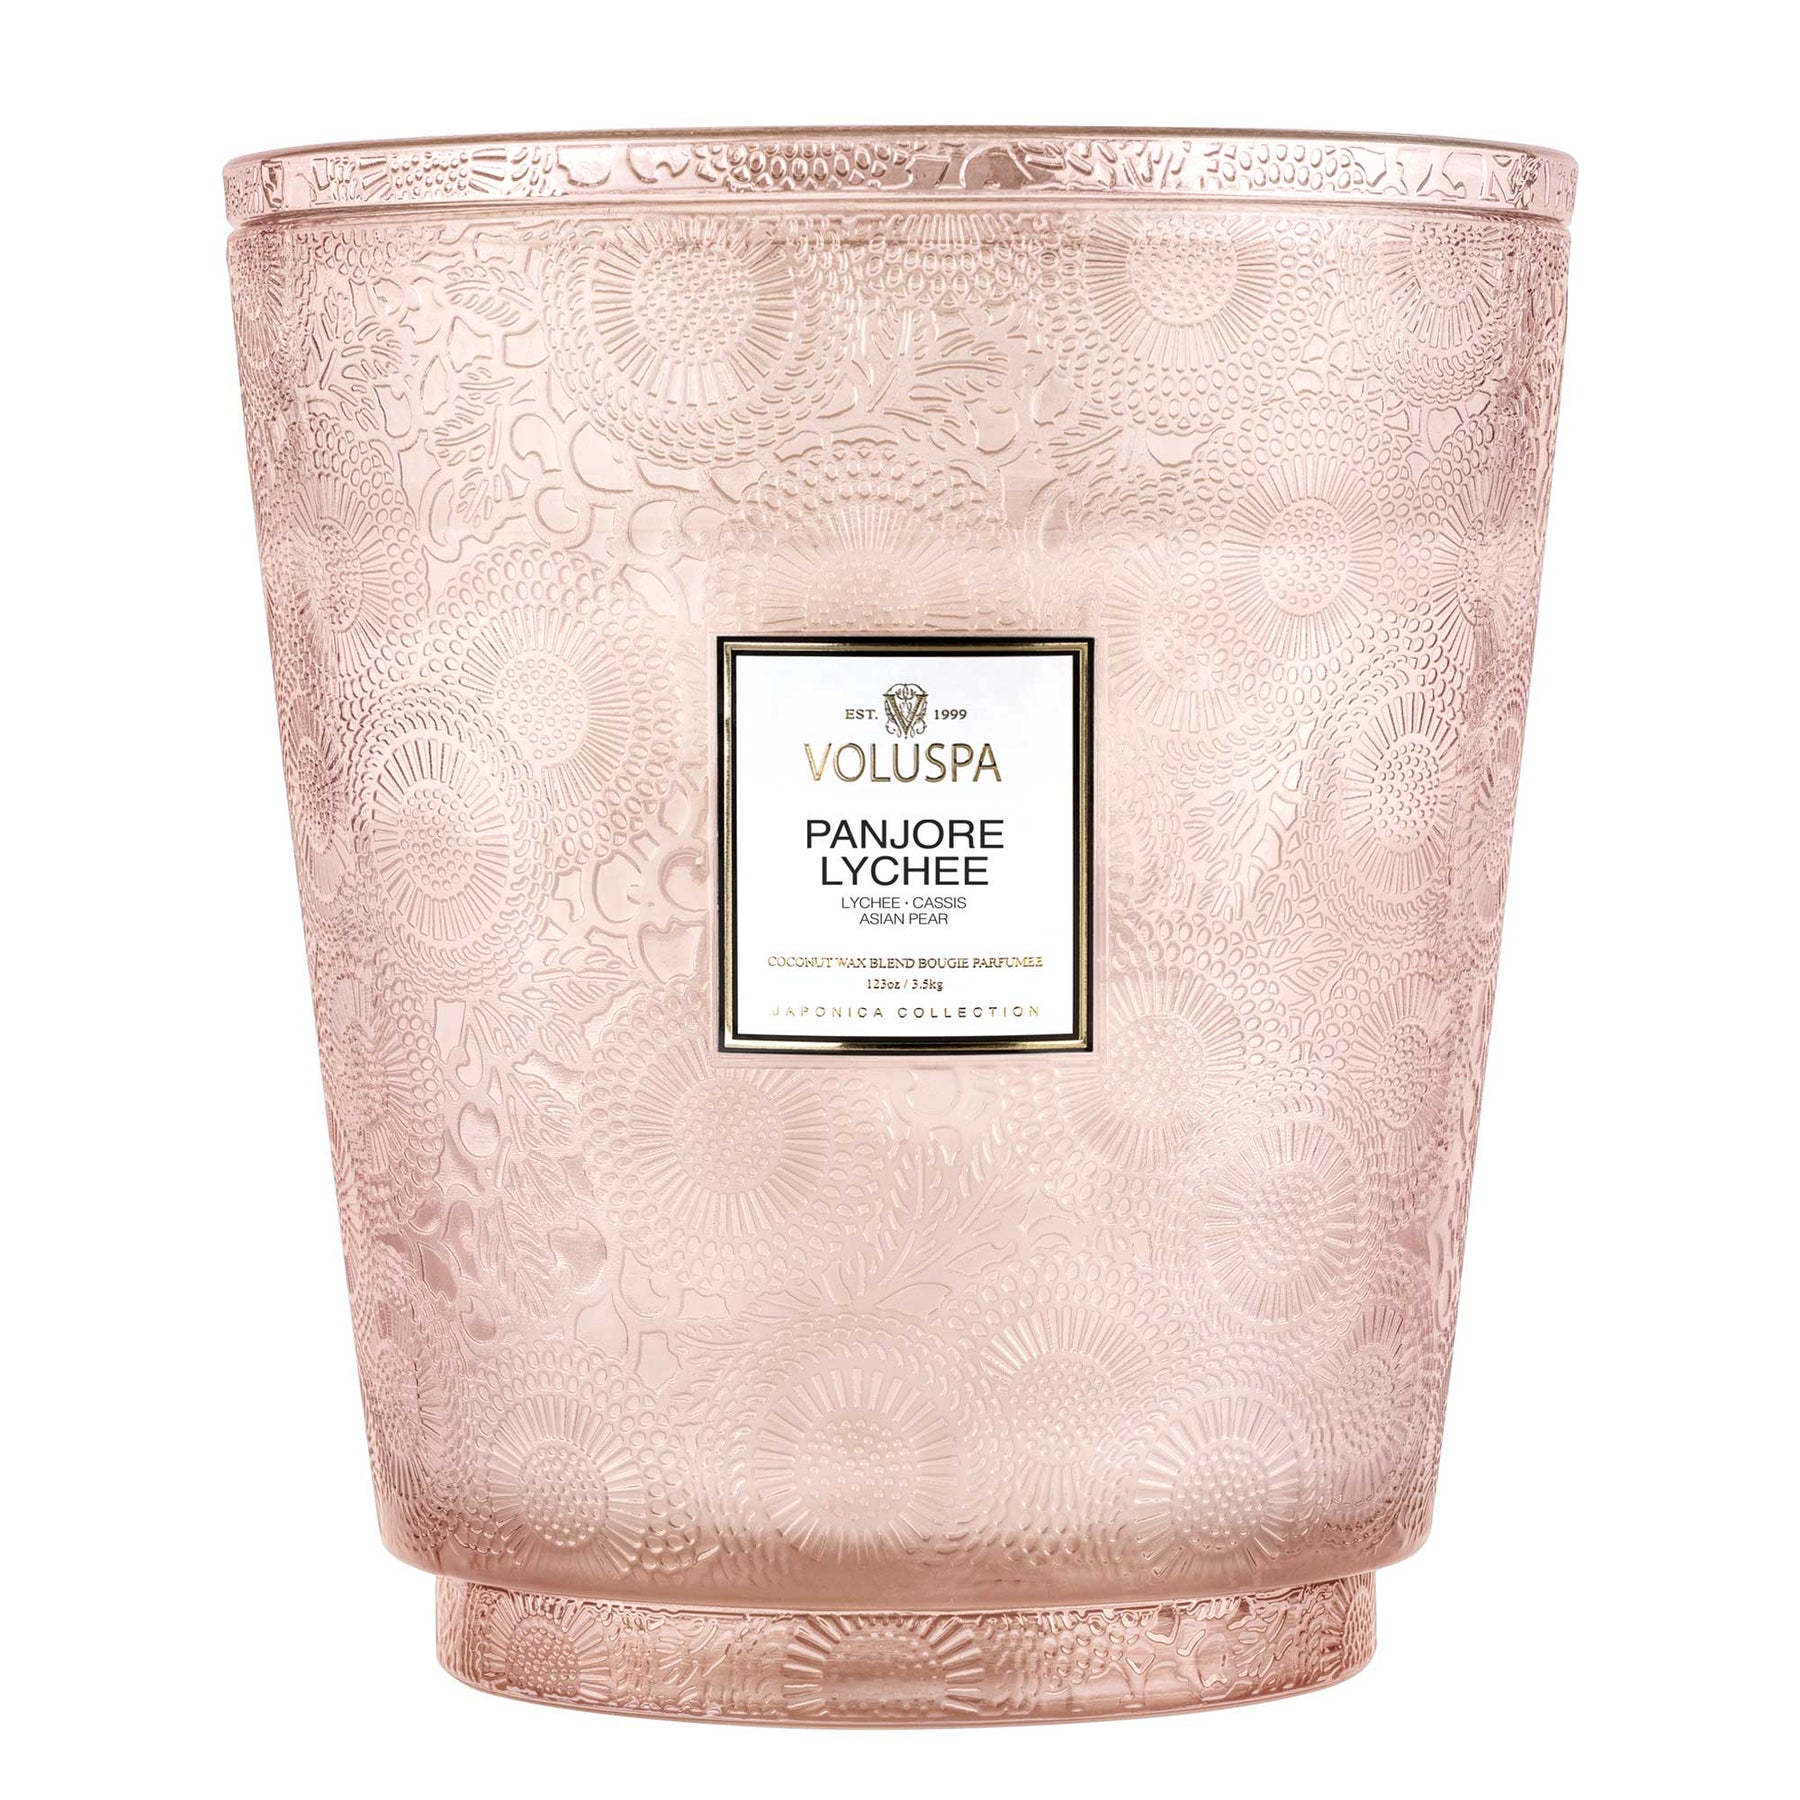 Panjore Lychee - 5 Wick Hearth Candle